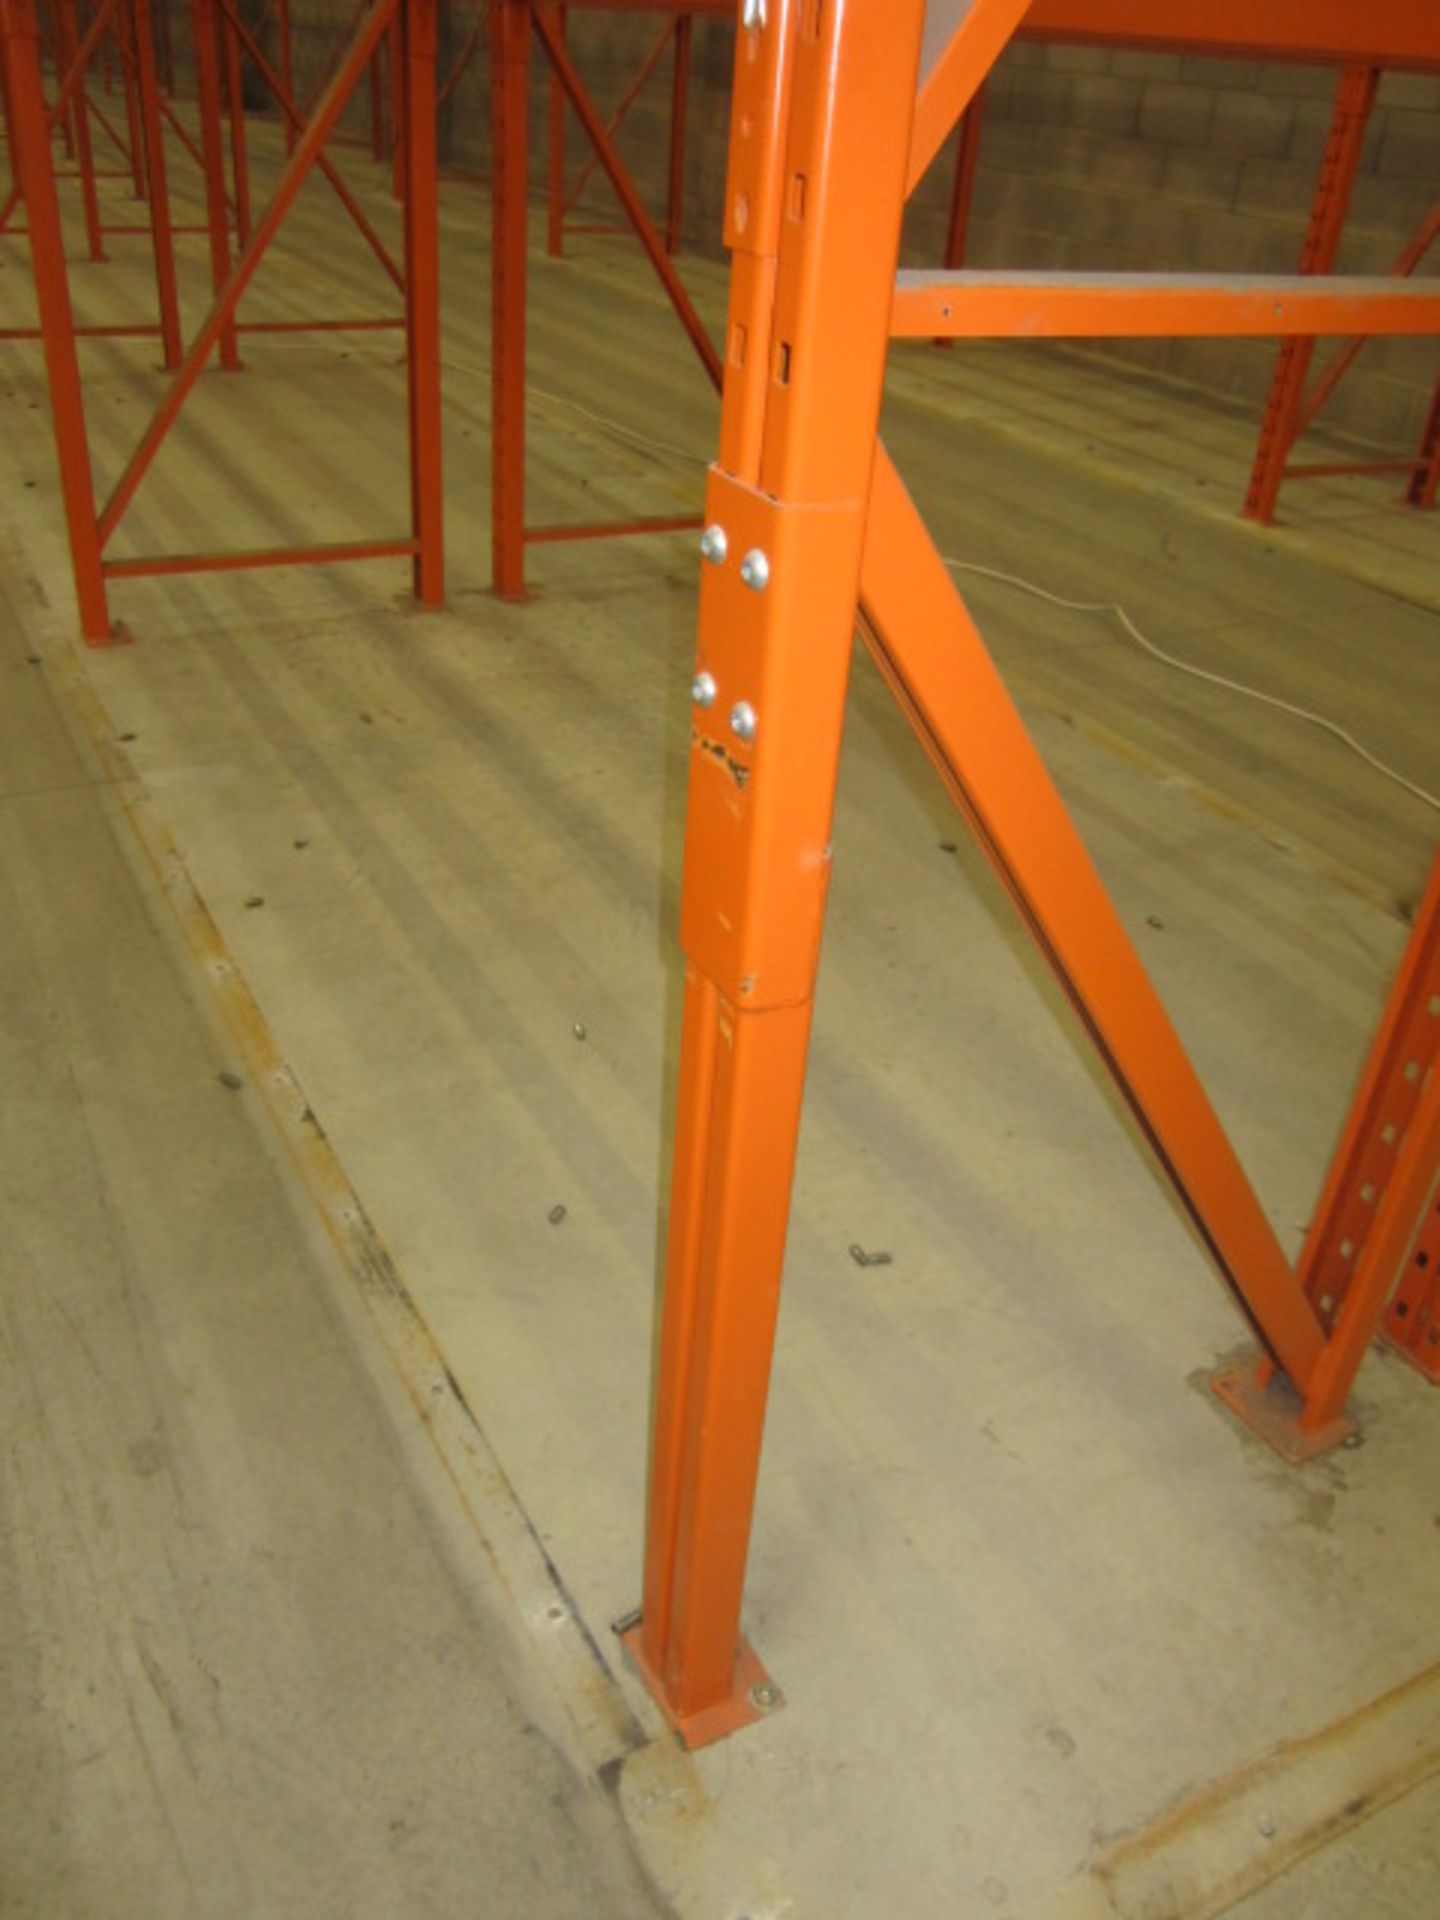 10 bays of Redirack boltless pallet racking, approx. sizes depth 800mm x width 2,750mm x Height 7m - - Image 2 of 2